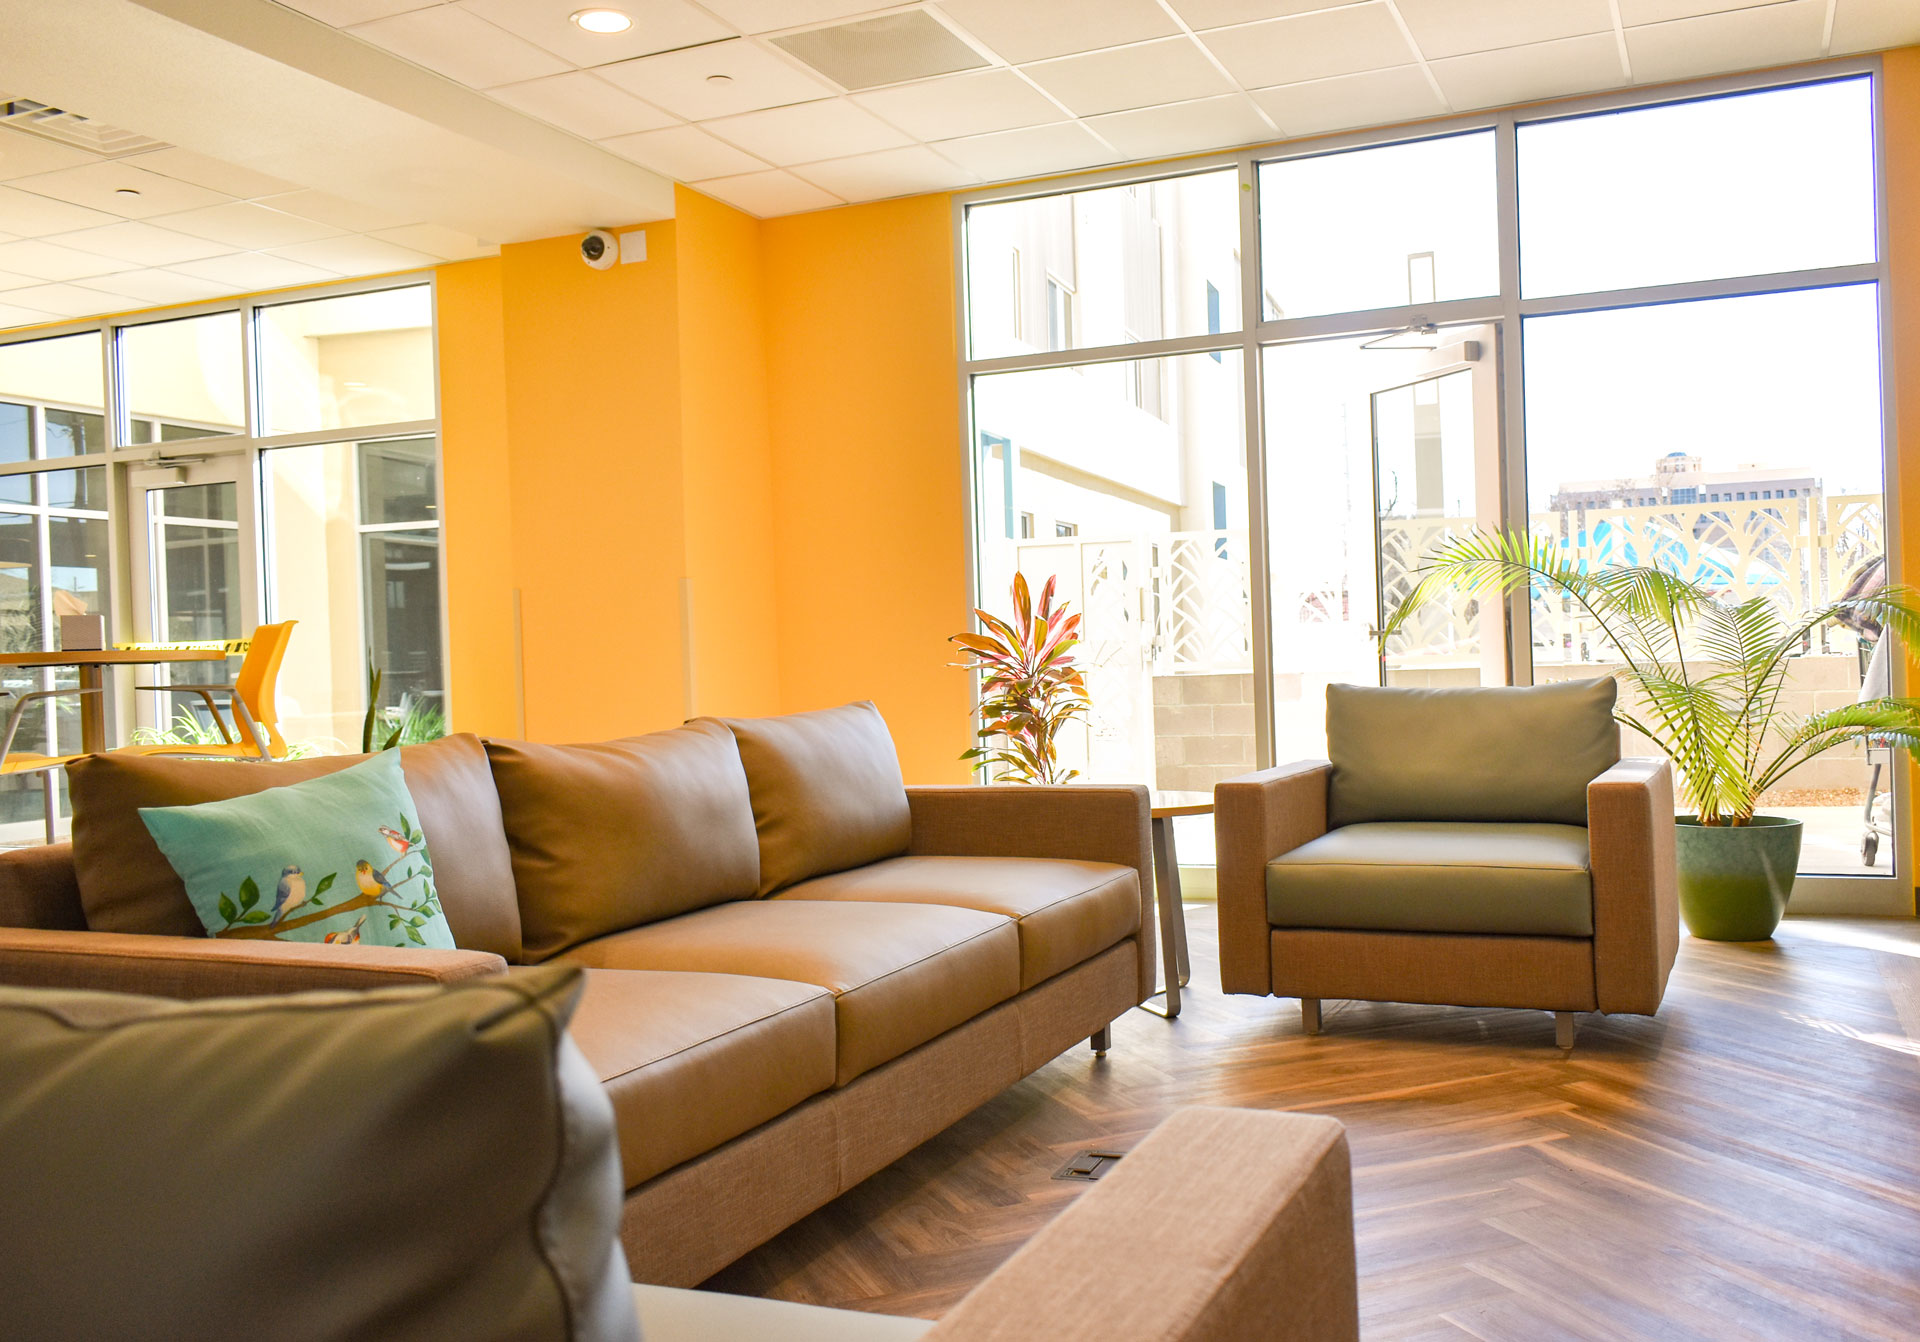 Seating area in the Psycho-Social Rehabilitation program area at Hope Village. Bright yellow walls.